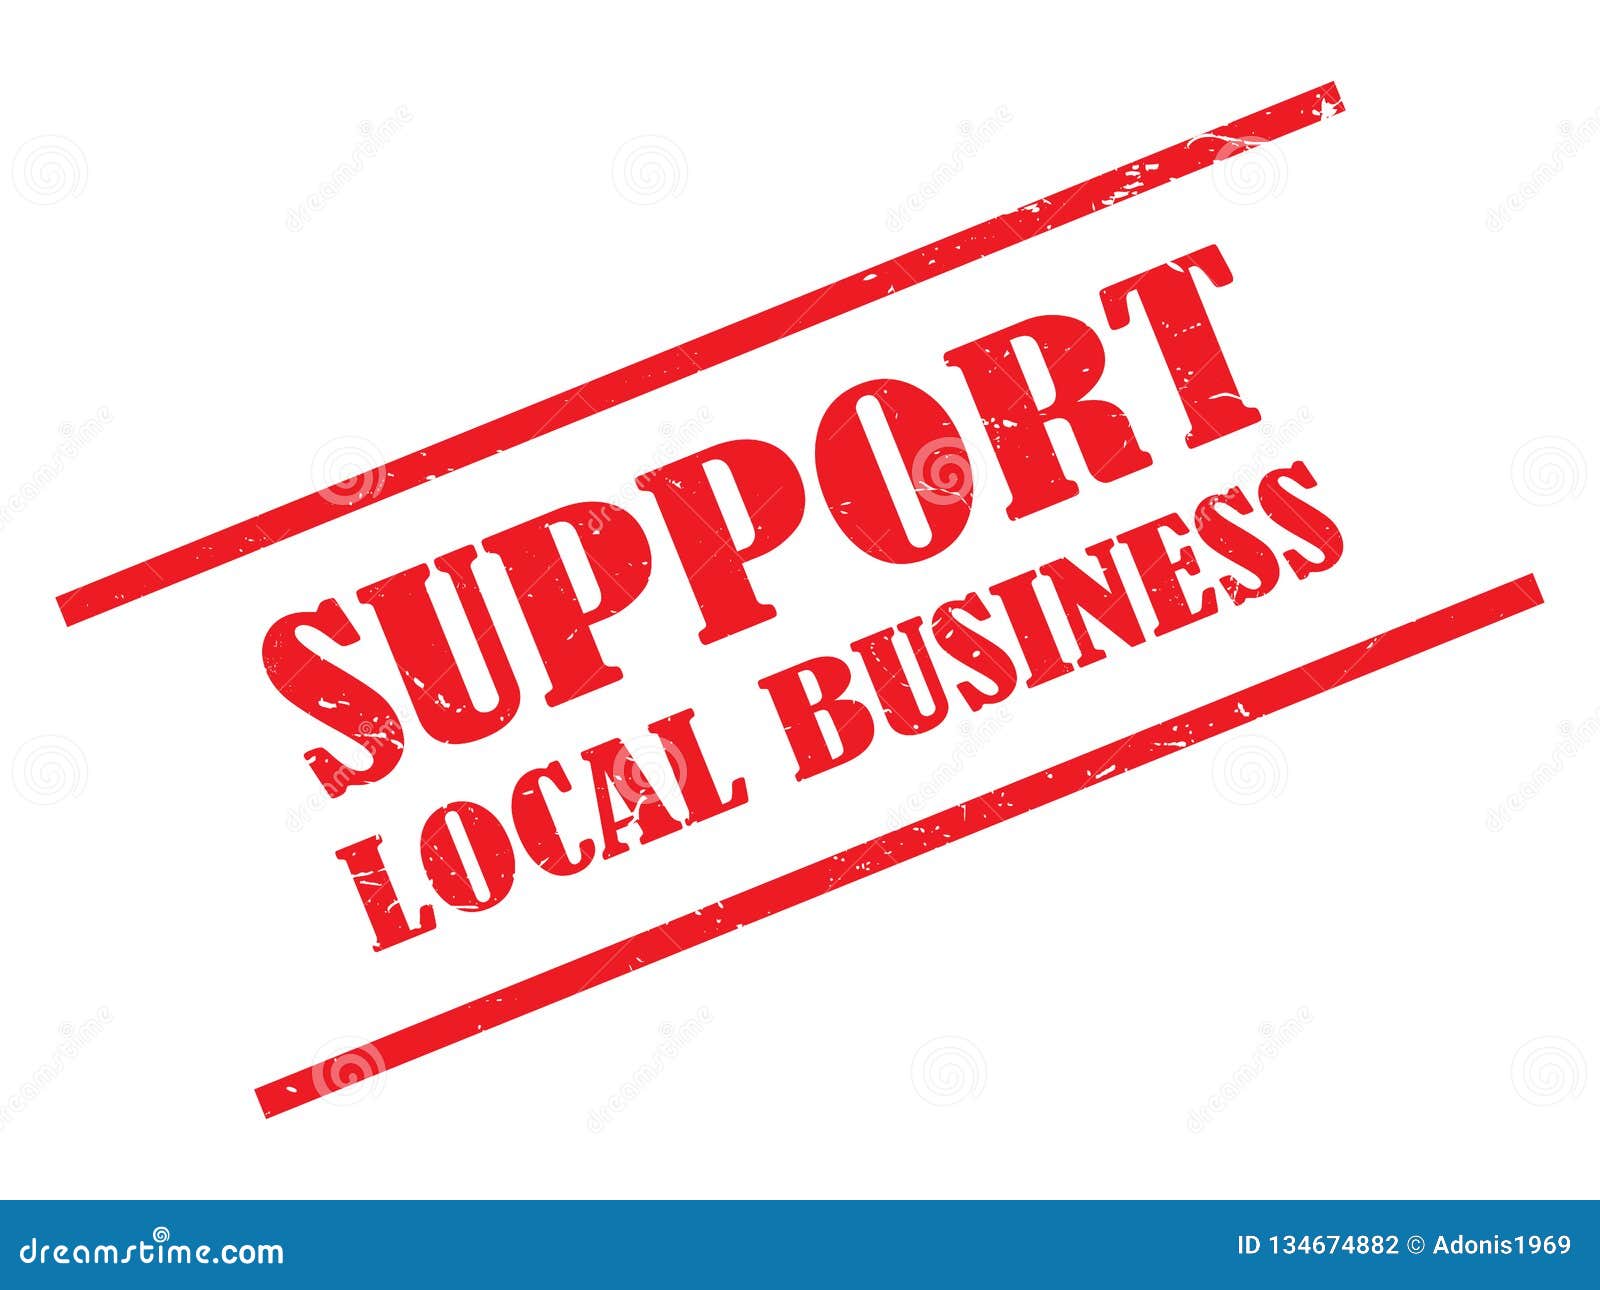 support local business stamp